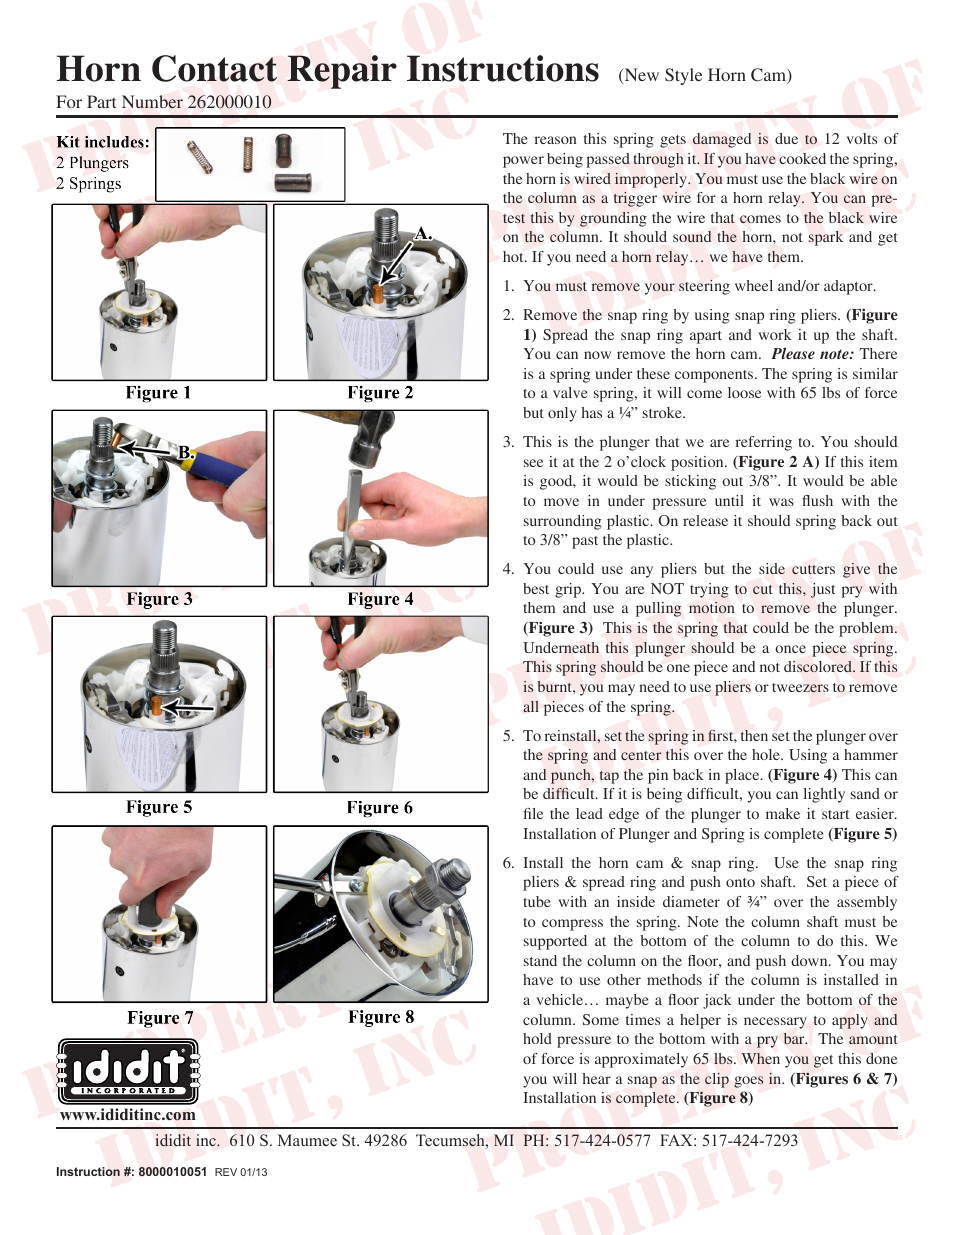 Horn Contact Repair Instructions – New Style Horn Cam